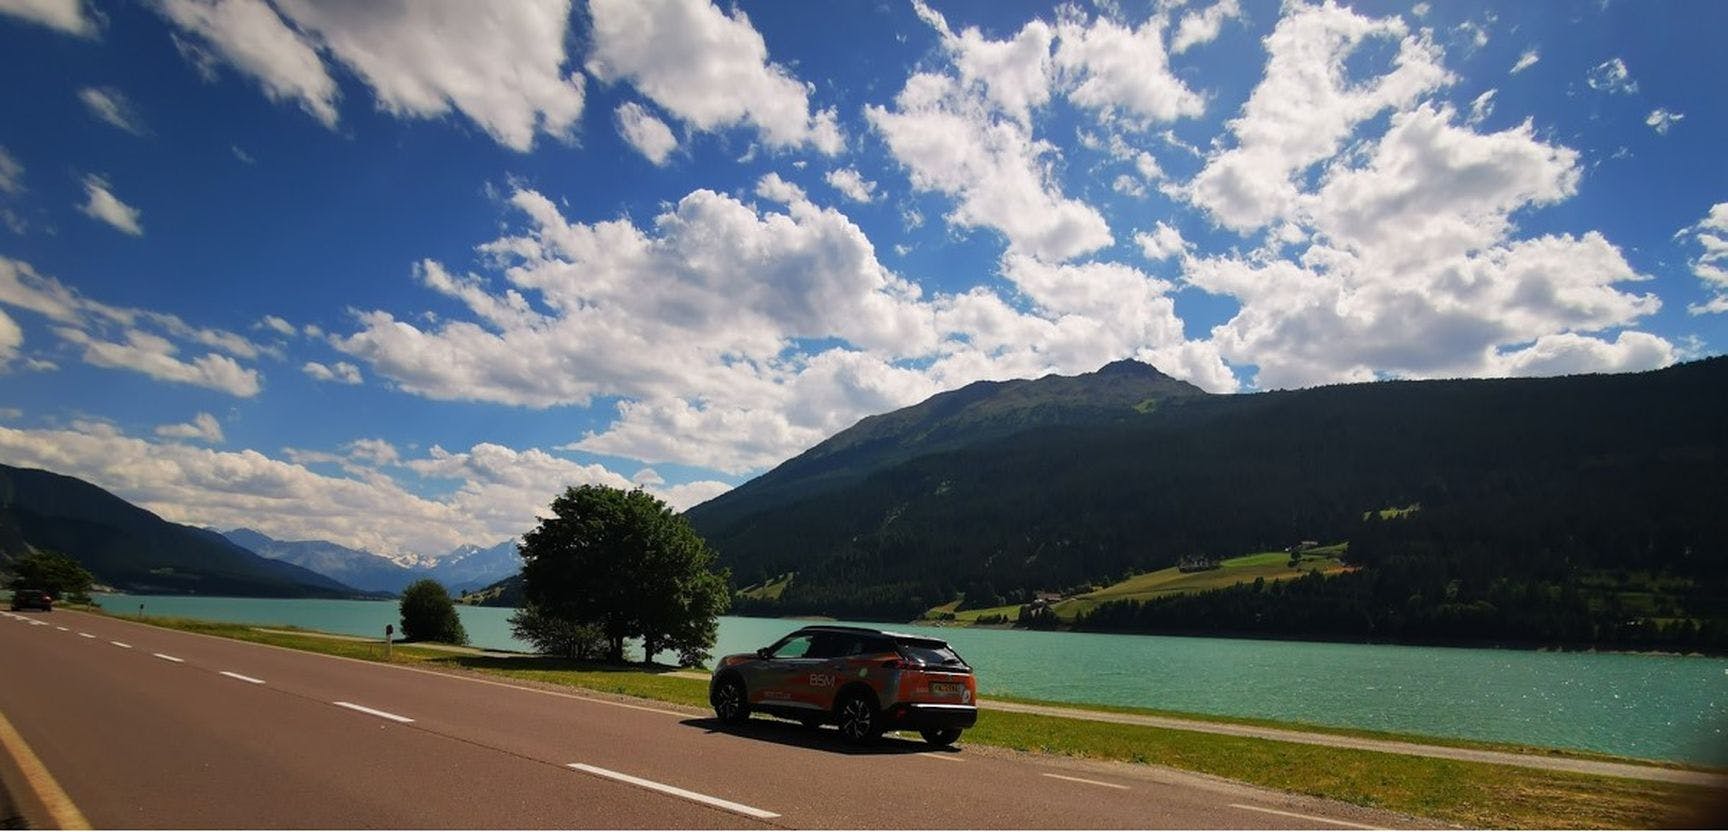 Photograph of an EV driving along the French-Swiss border